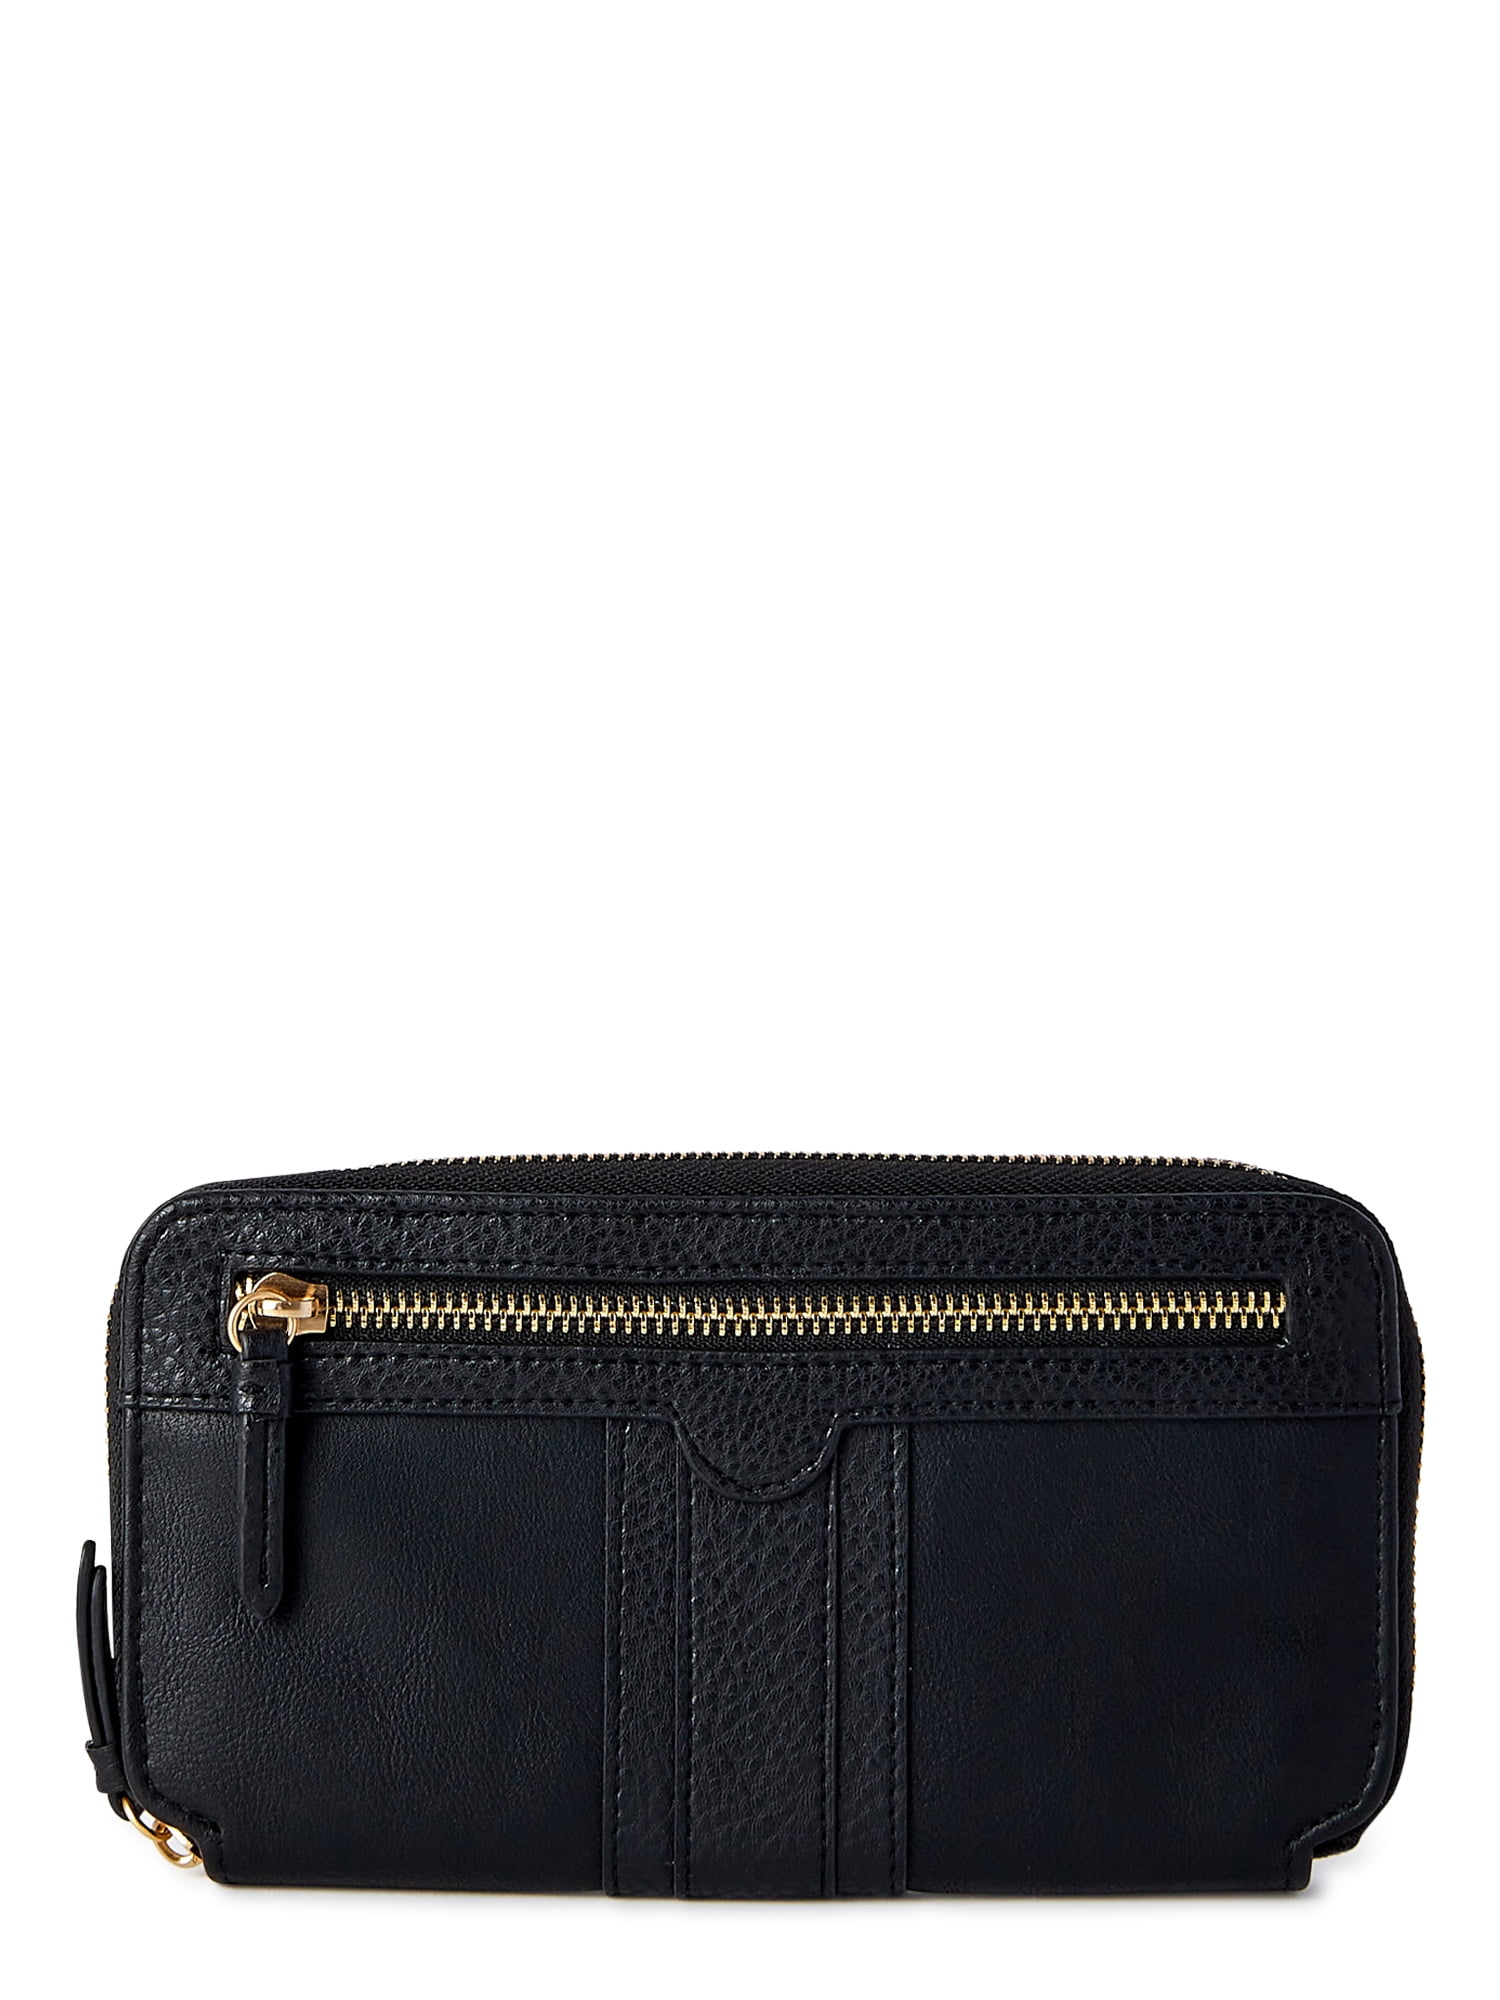 Time and Tru Freda Large Zip Around Wallet